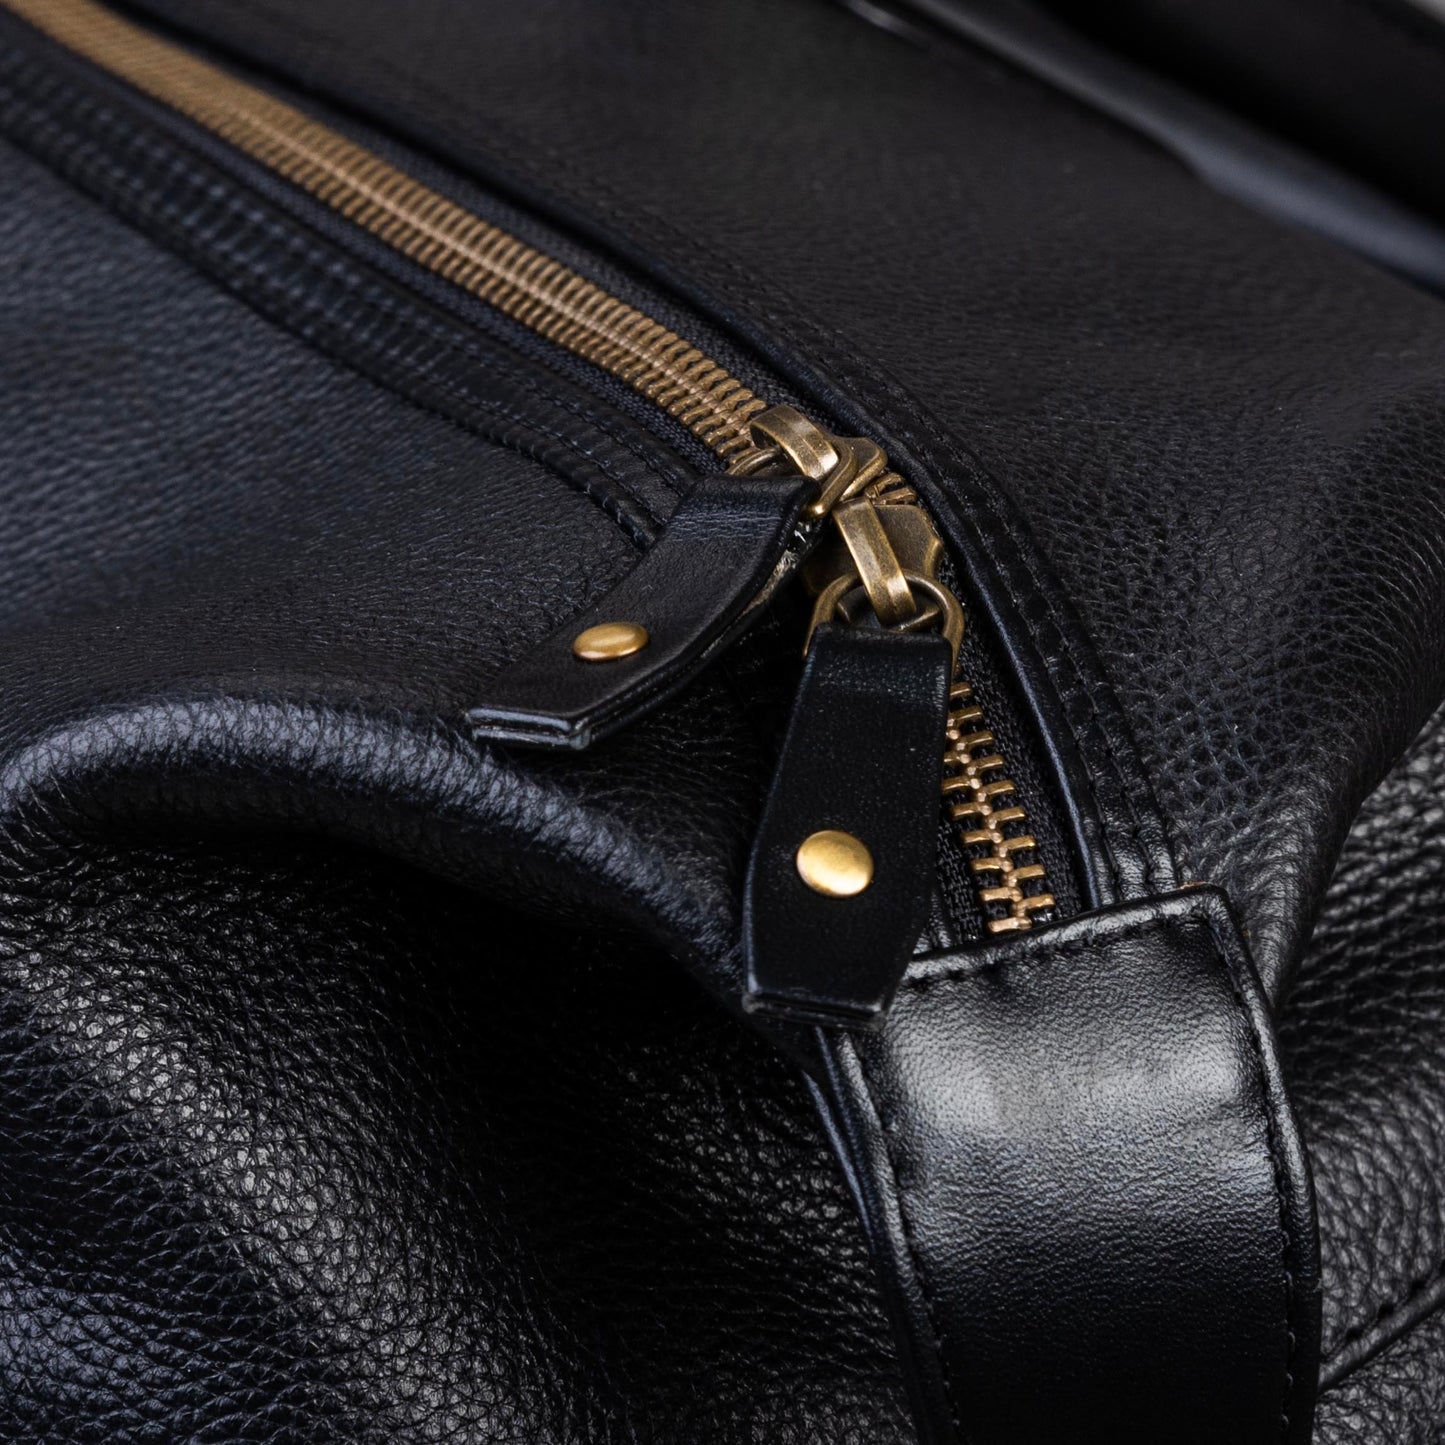 A Weekender Bag for your travel. Designed with Two Zippers